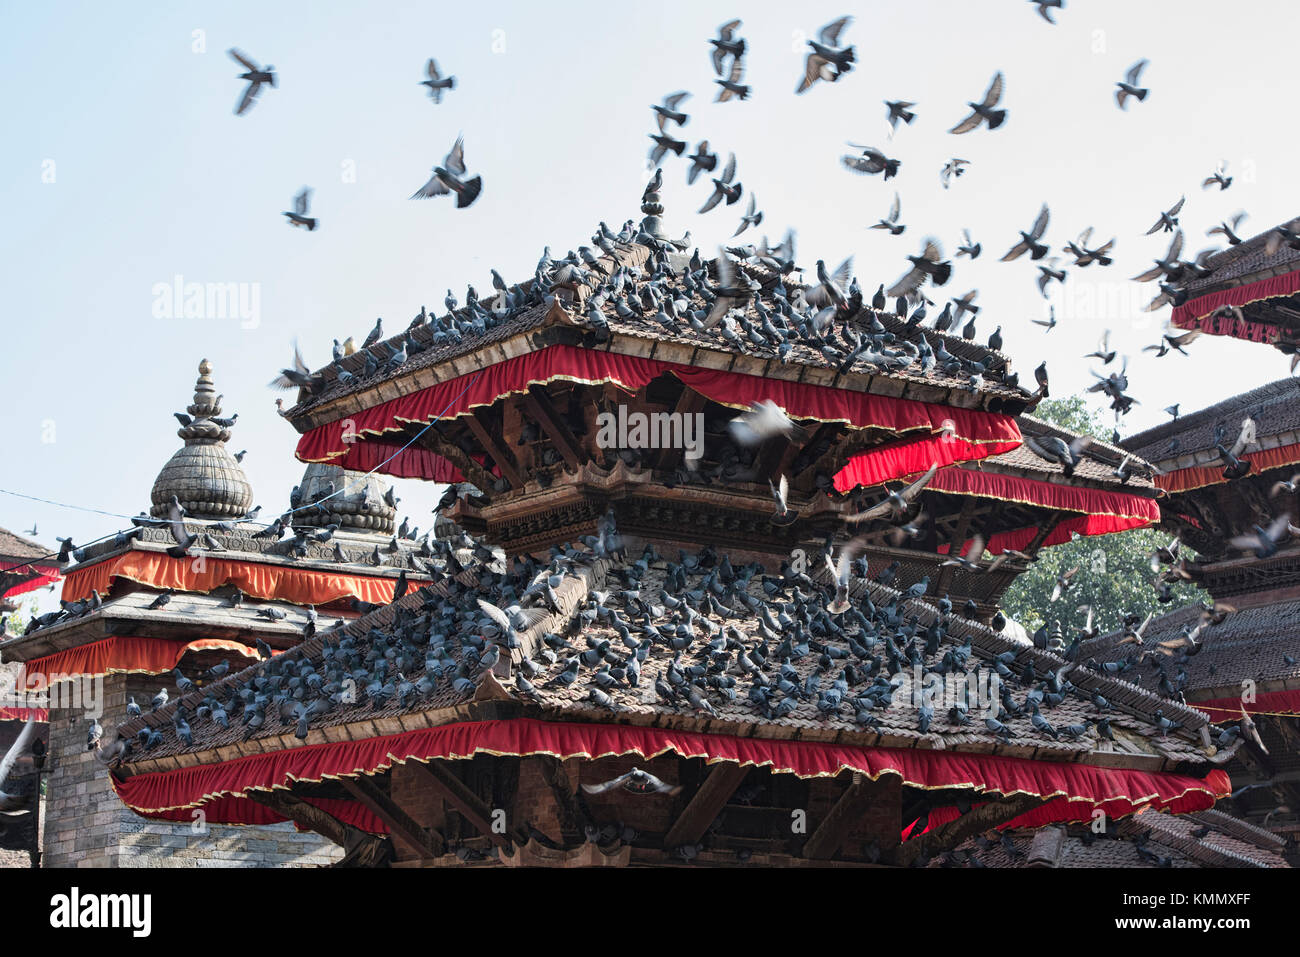 Pigeons throng a temple in Durbar Square, Kathmandu, Nepal Stock Photo